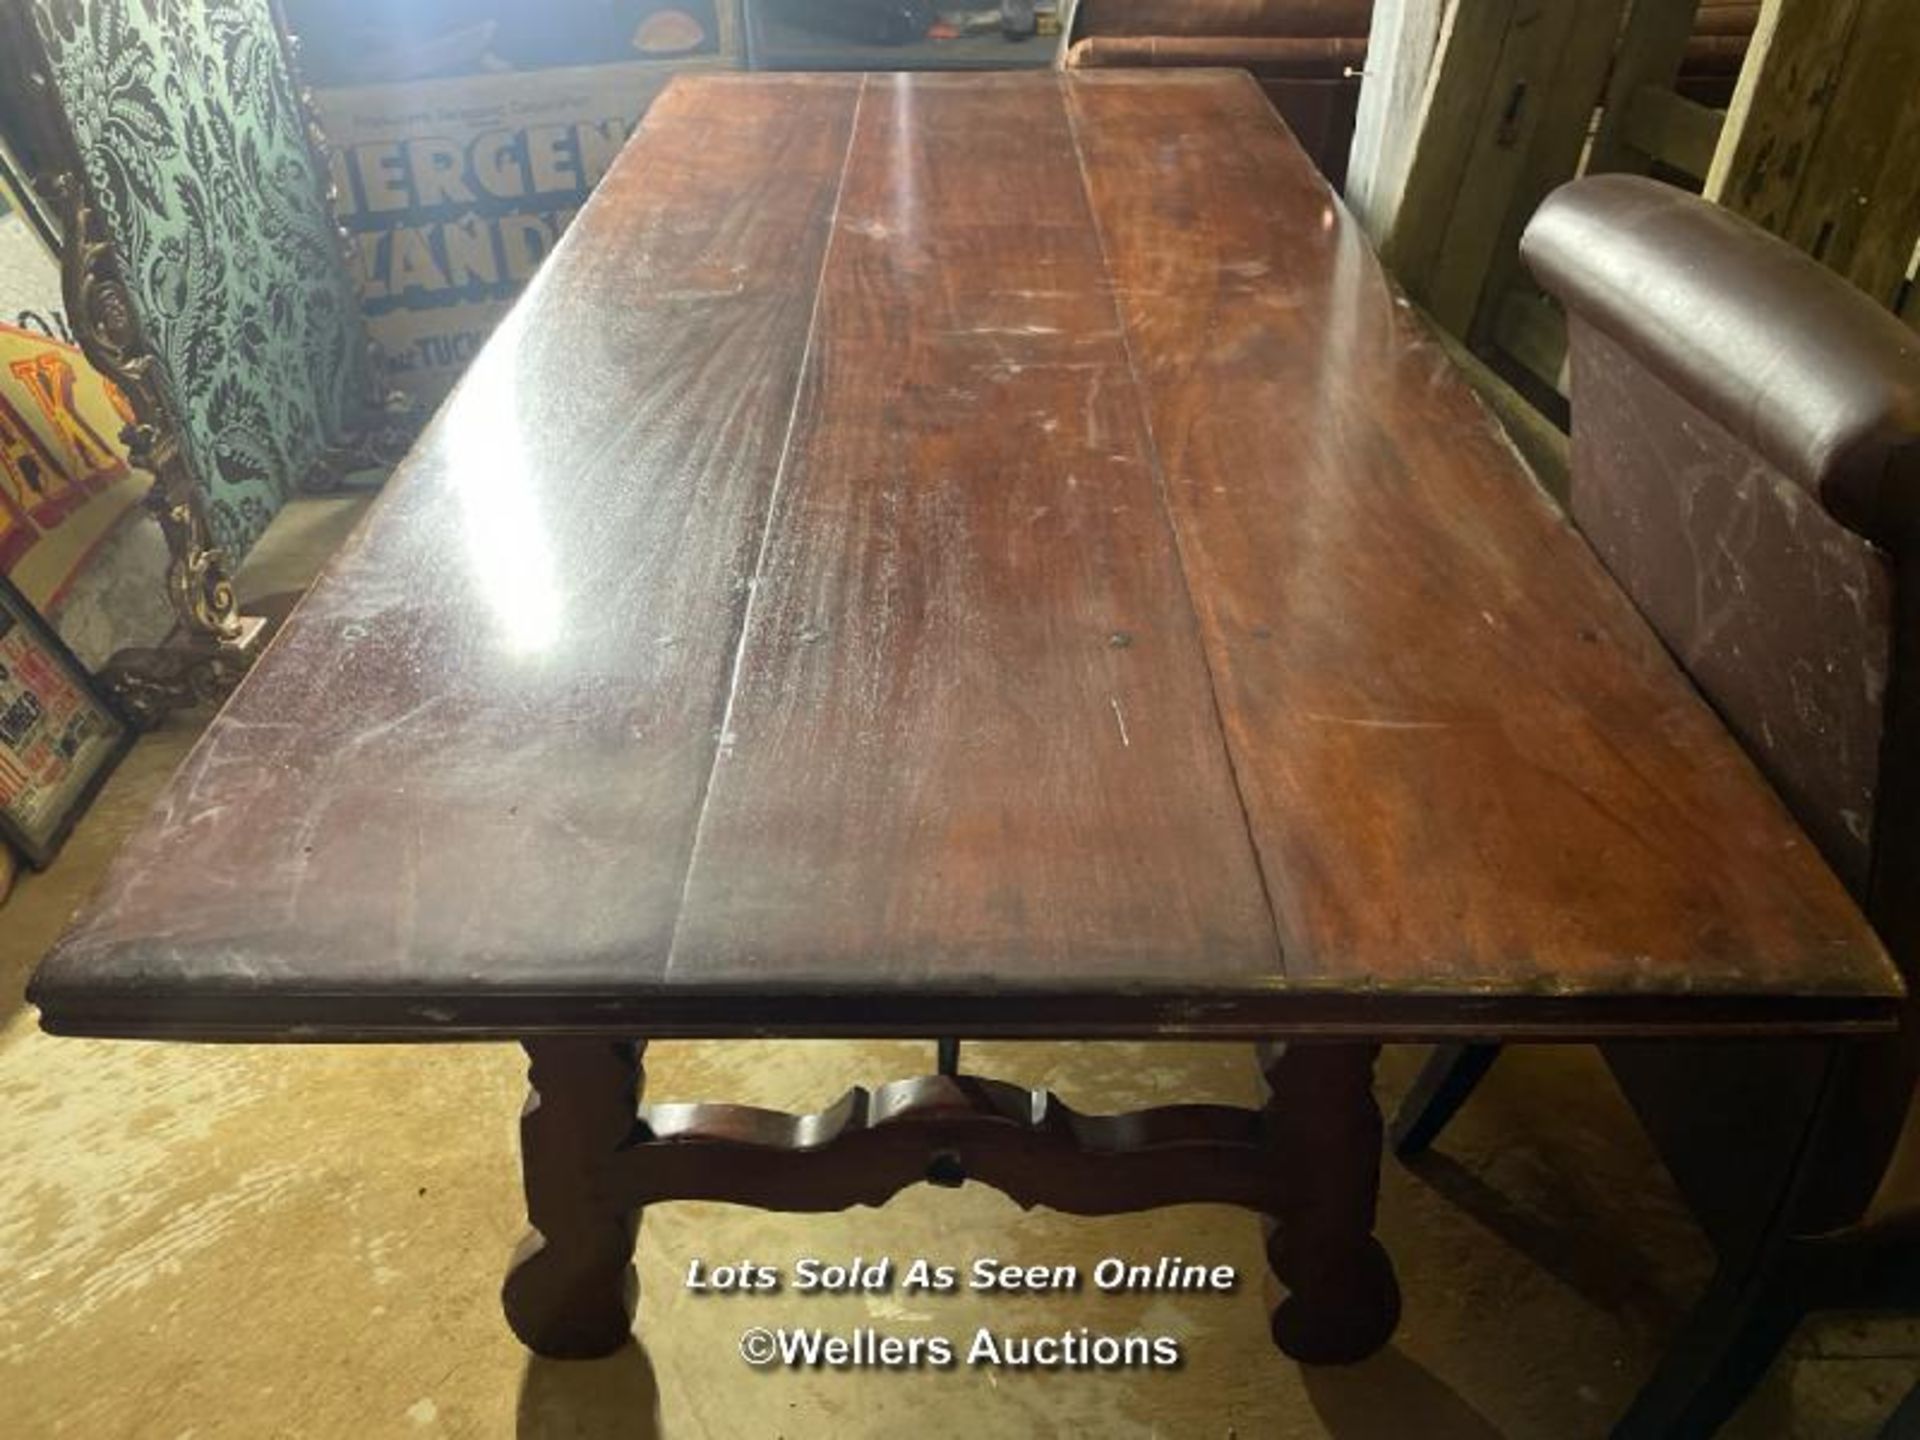 AN 18TH CENTURY STYLE SPANISH REFECTORY TABLE IN FRUITWOOD, 204 X 83 X 77CM - Image 2 of 6